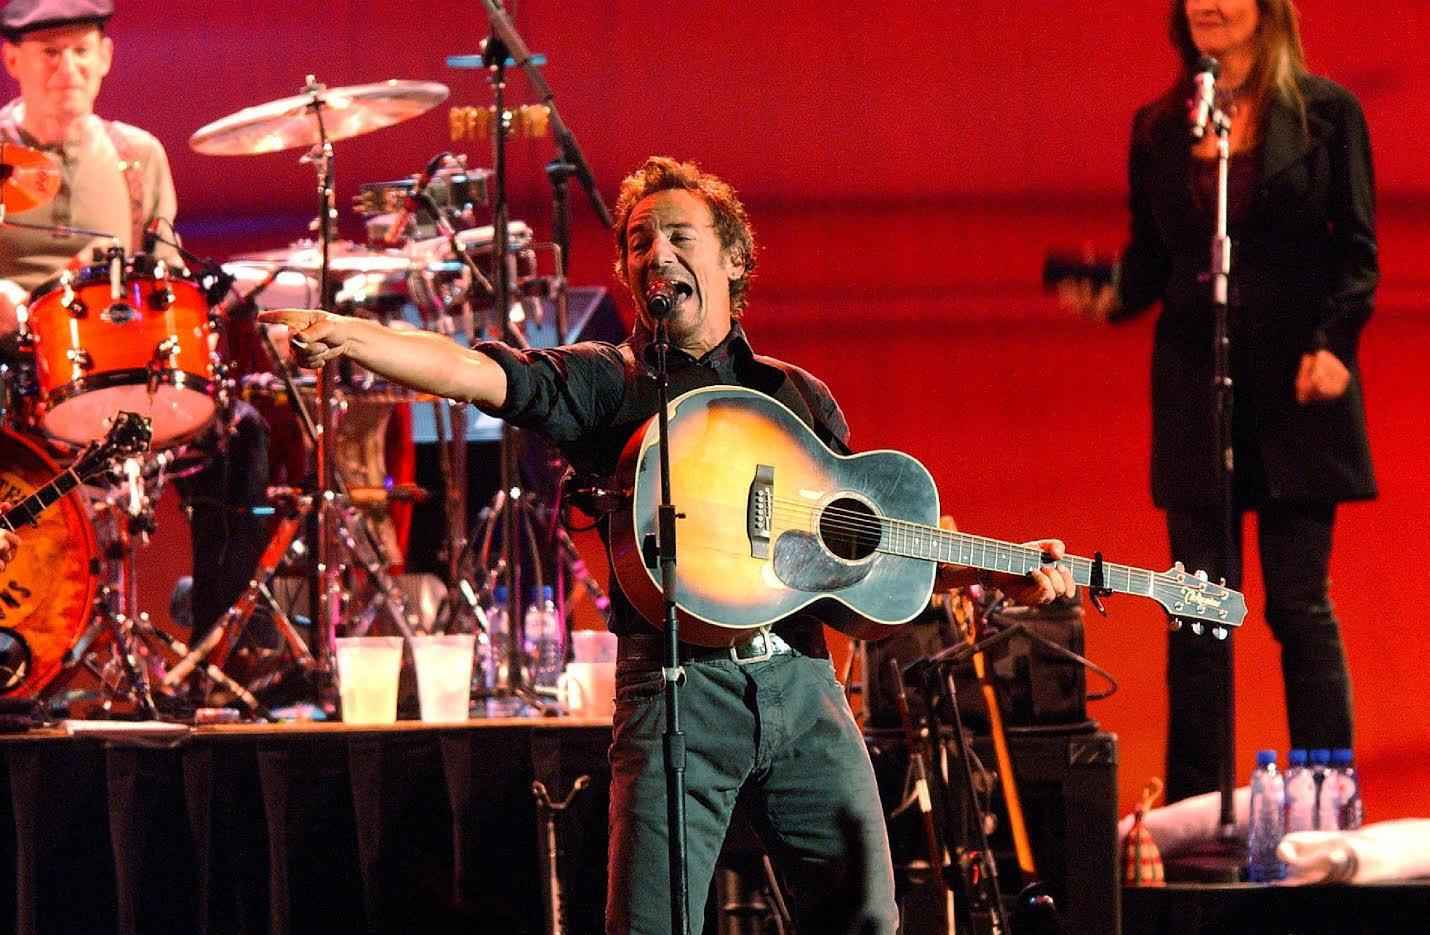 Bruce Springsteen and The Seeger Sessions Band performing live at the Ahoy StadiumRotterdamWhere: HollandWhen: 13 Oct 2006Credit: WENN